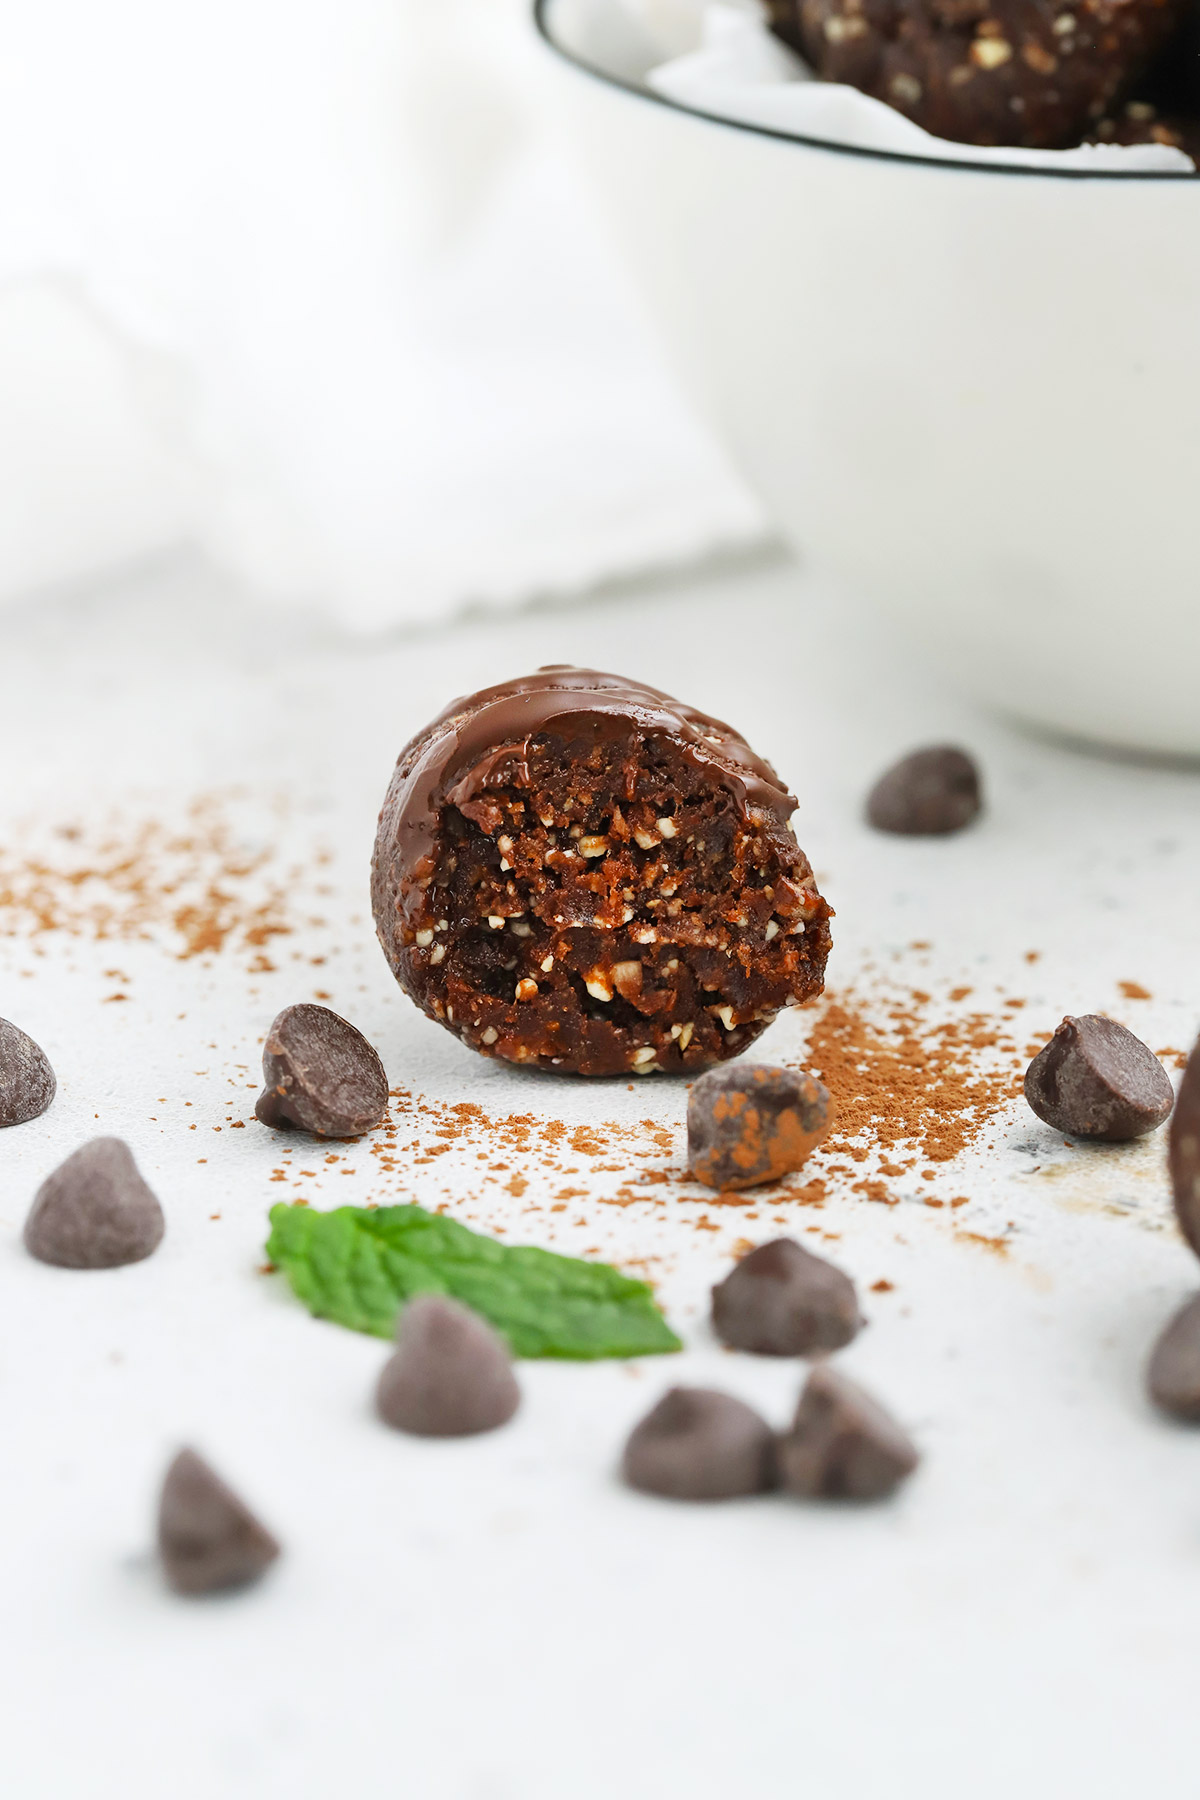 Close up front view of a mint chocolate energy bite with a bite taken out of it on a white background. Chocolate chips, cocoa powder, and mint leaves scattered around it. 